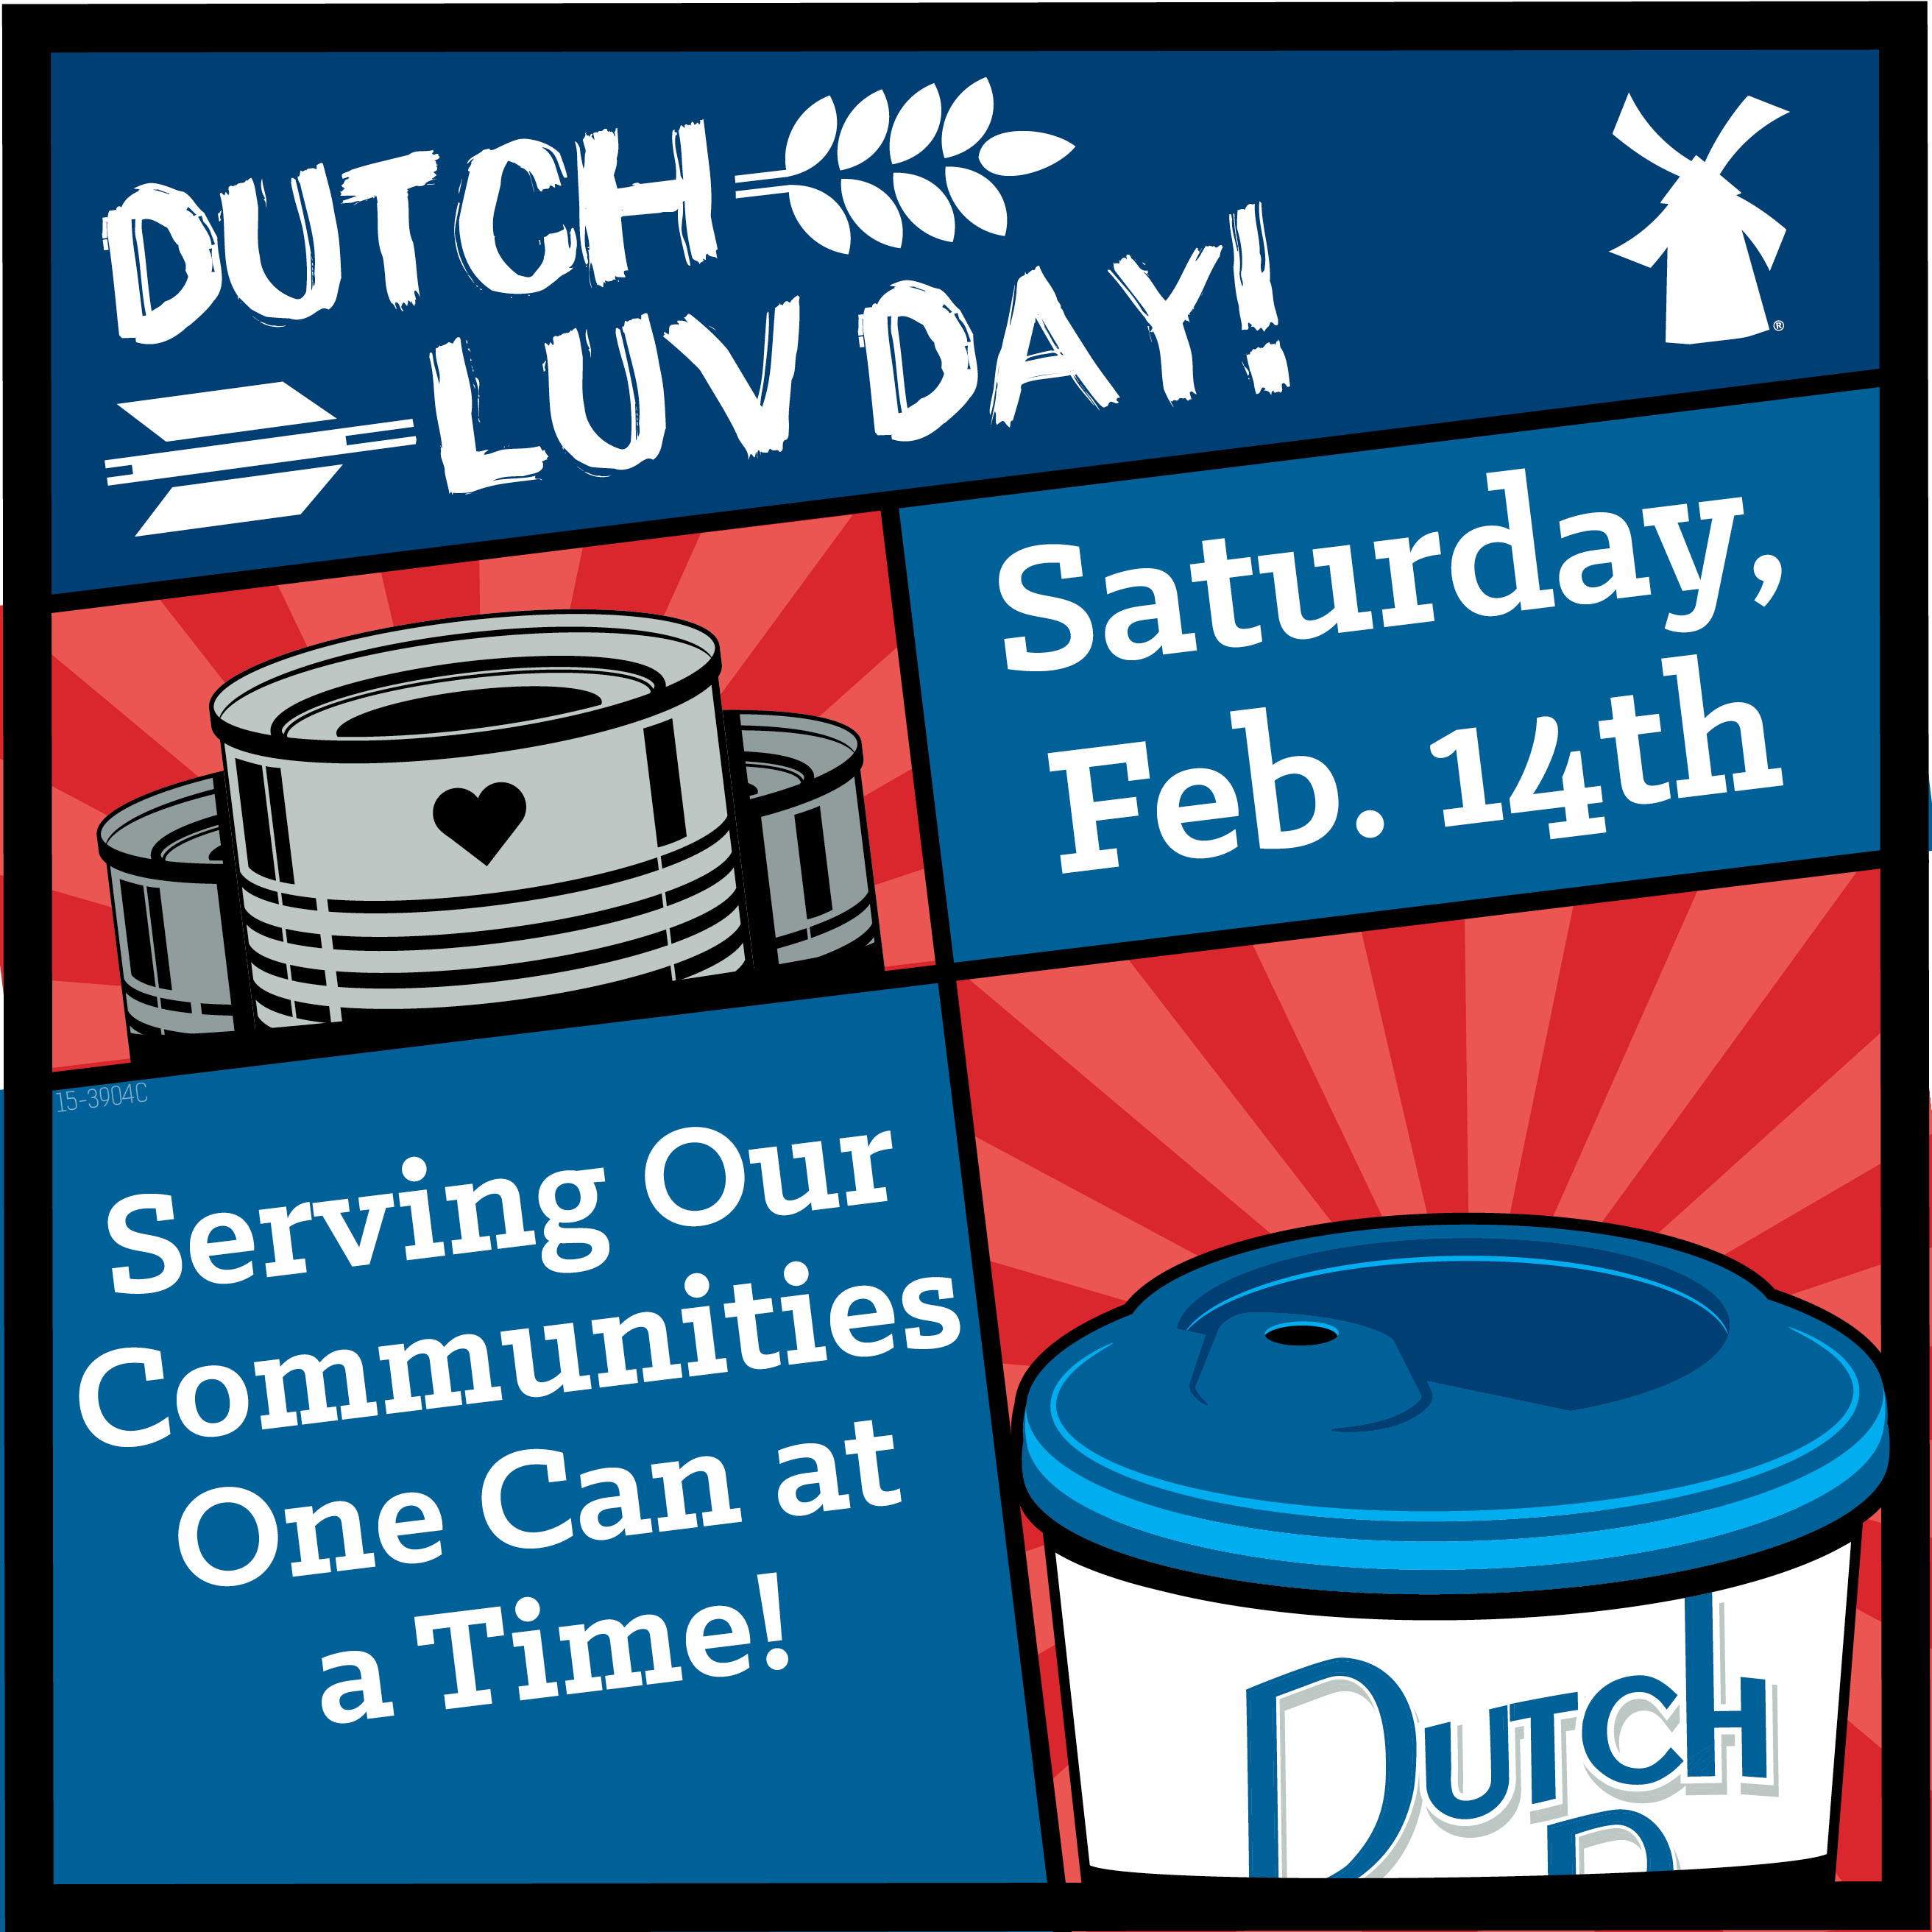 Dutch Luv, Serving Our Communities One Can at a Time